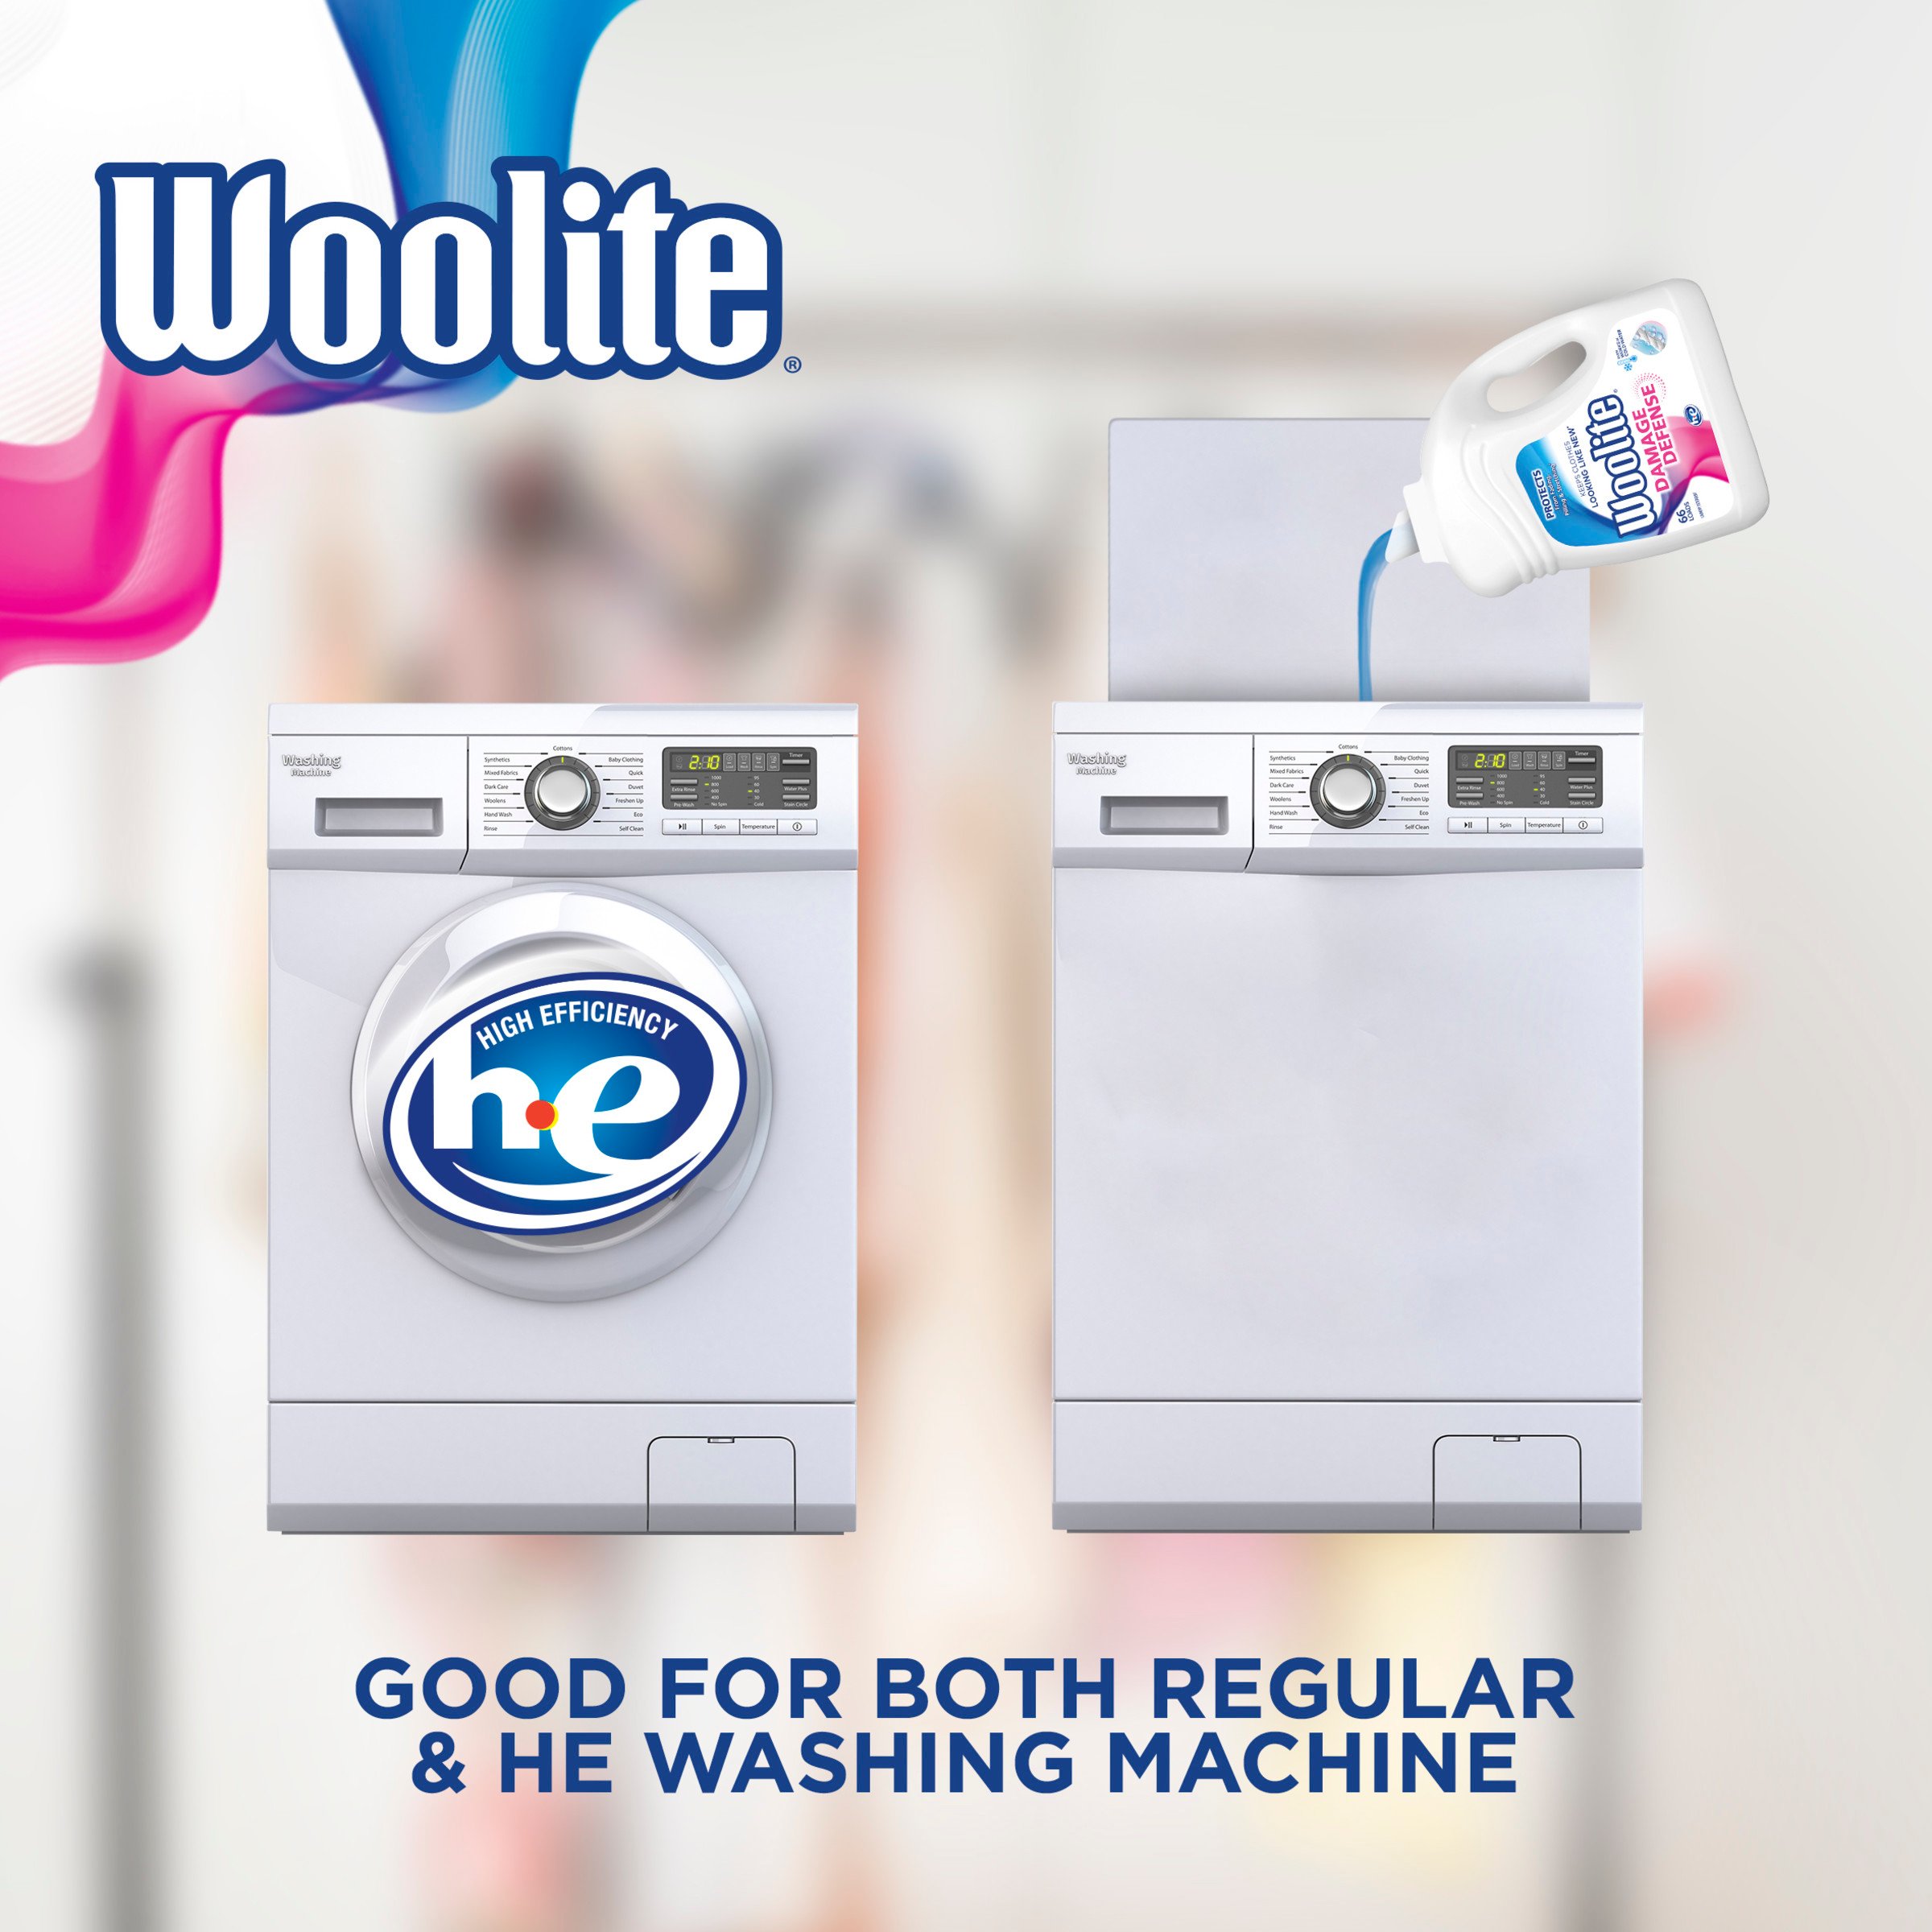 Woolite Laundry Detergent Review